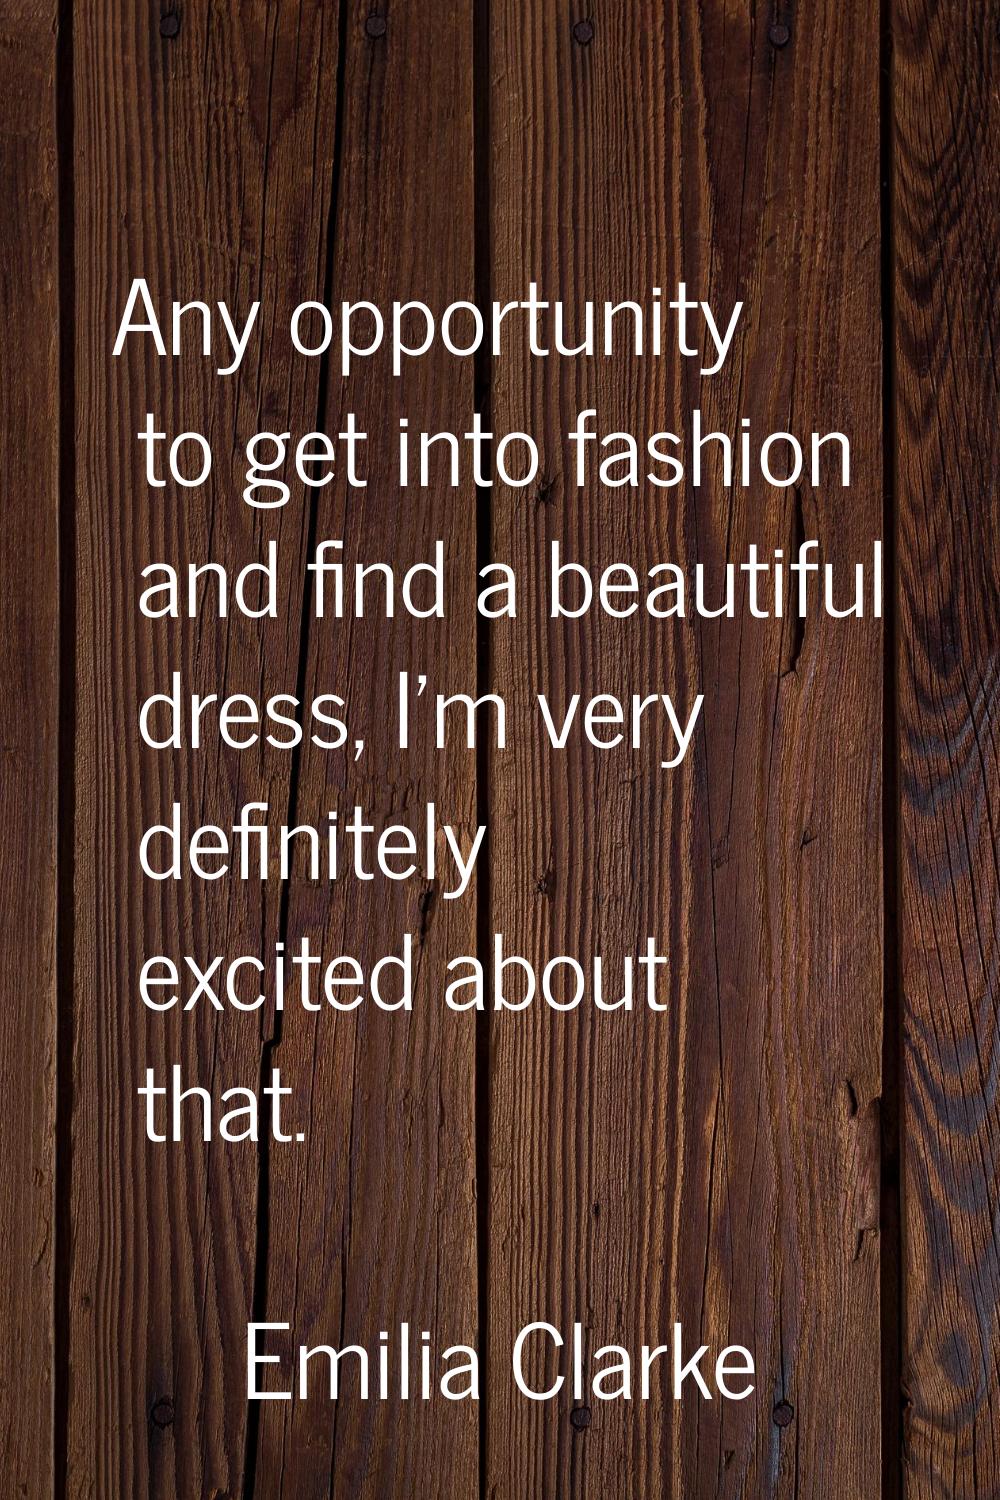 Any opportunity to get into fashion and find a beautiful dress, I'm very definitely excited about t